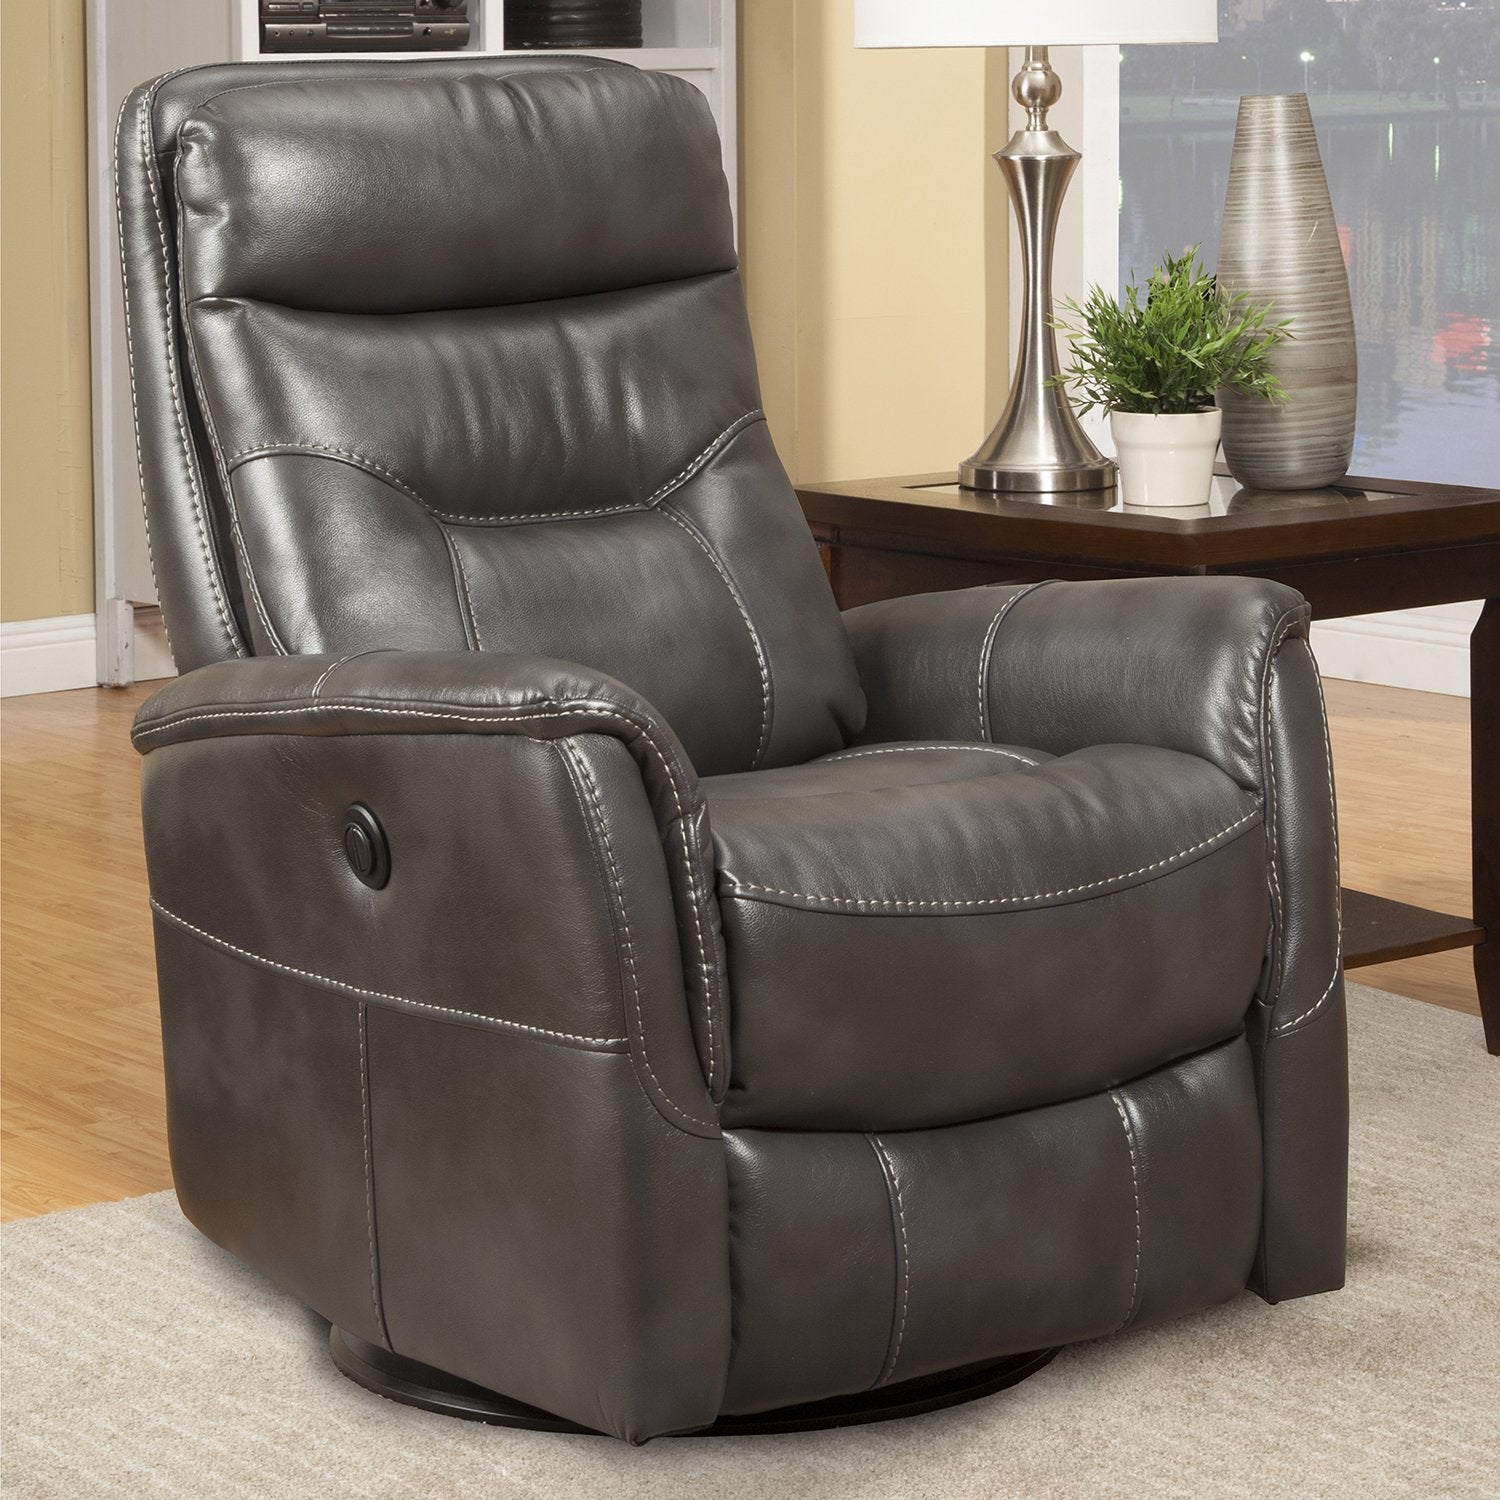 Simeon Collection Gemini Power Lift Recliner with Power Headrest in Capri  Silver